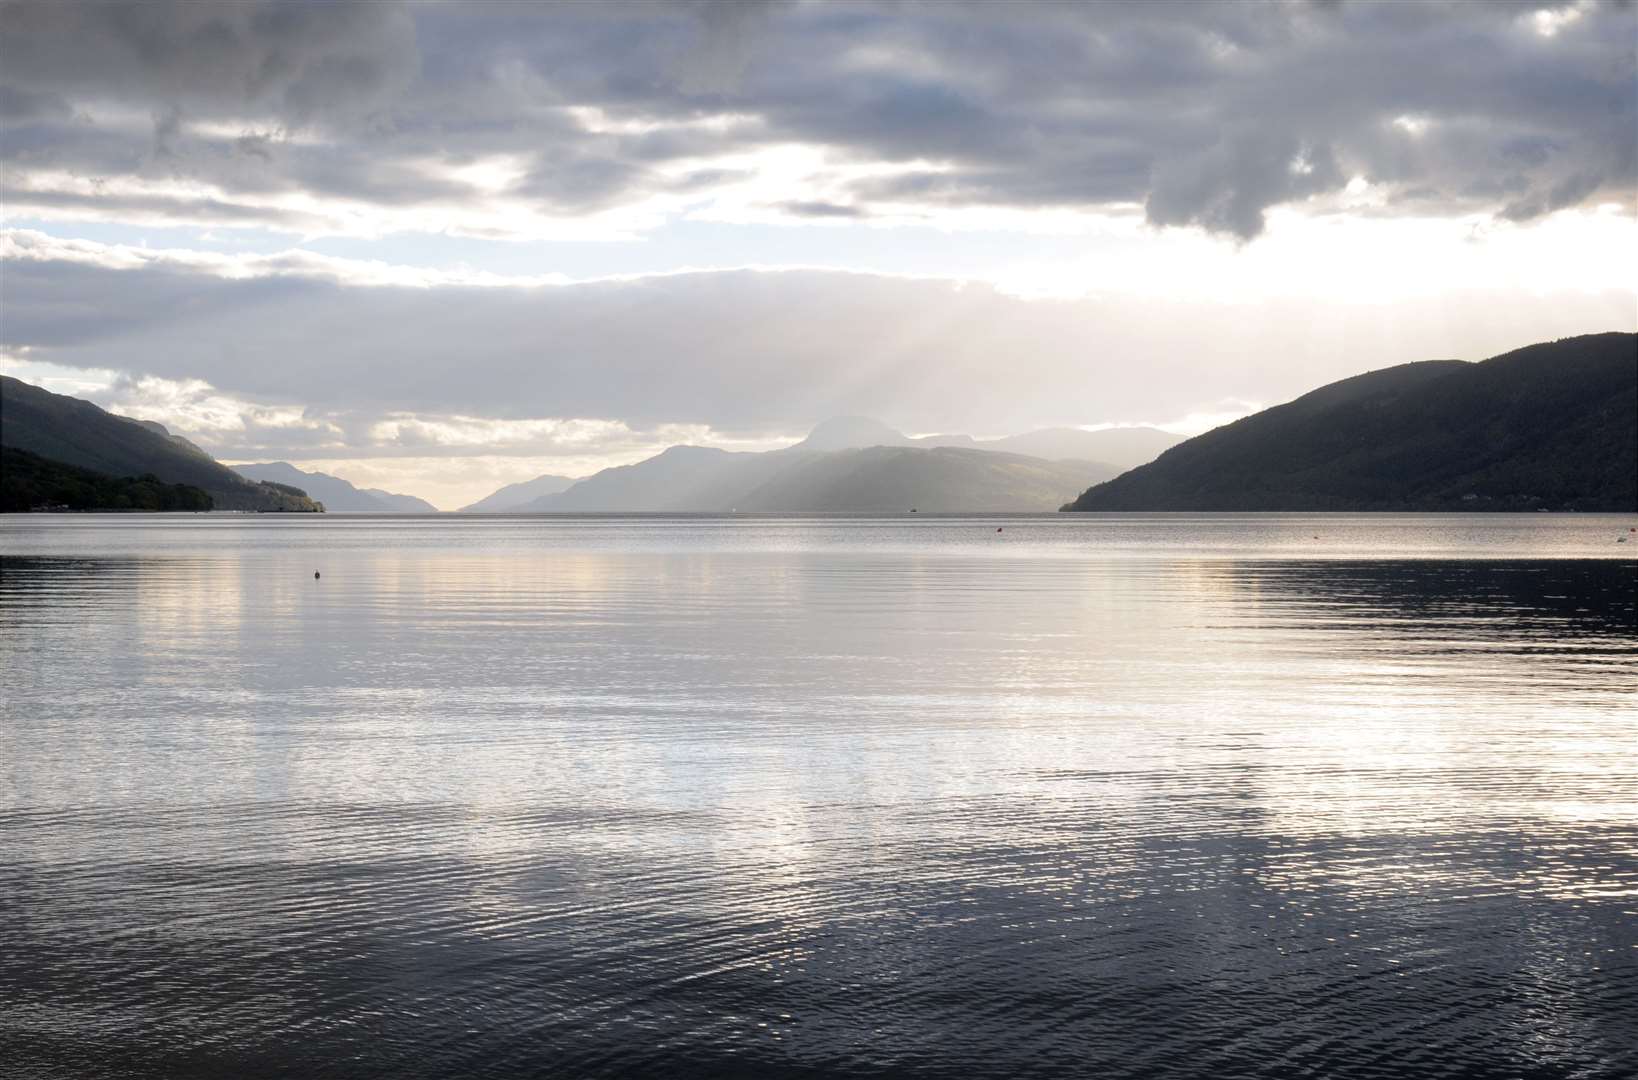 More sightings of something unusual on Loch Ness have been registered.